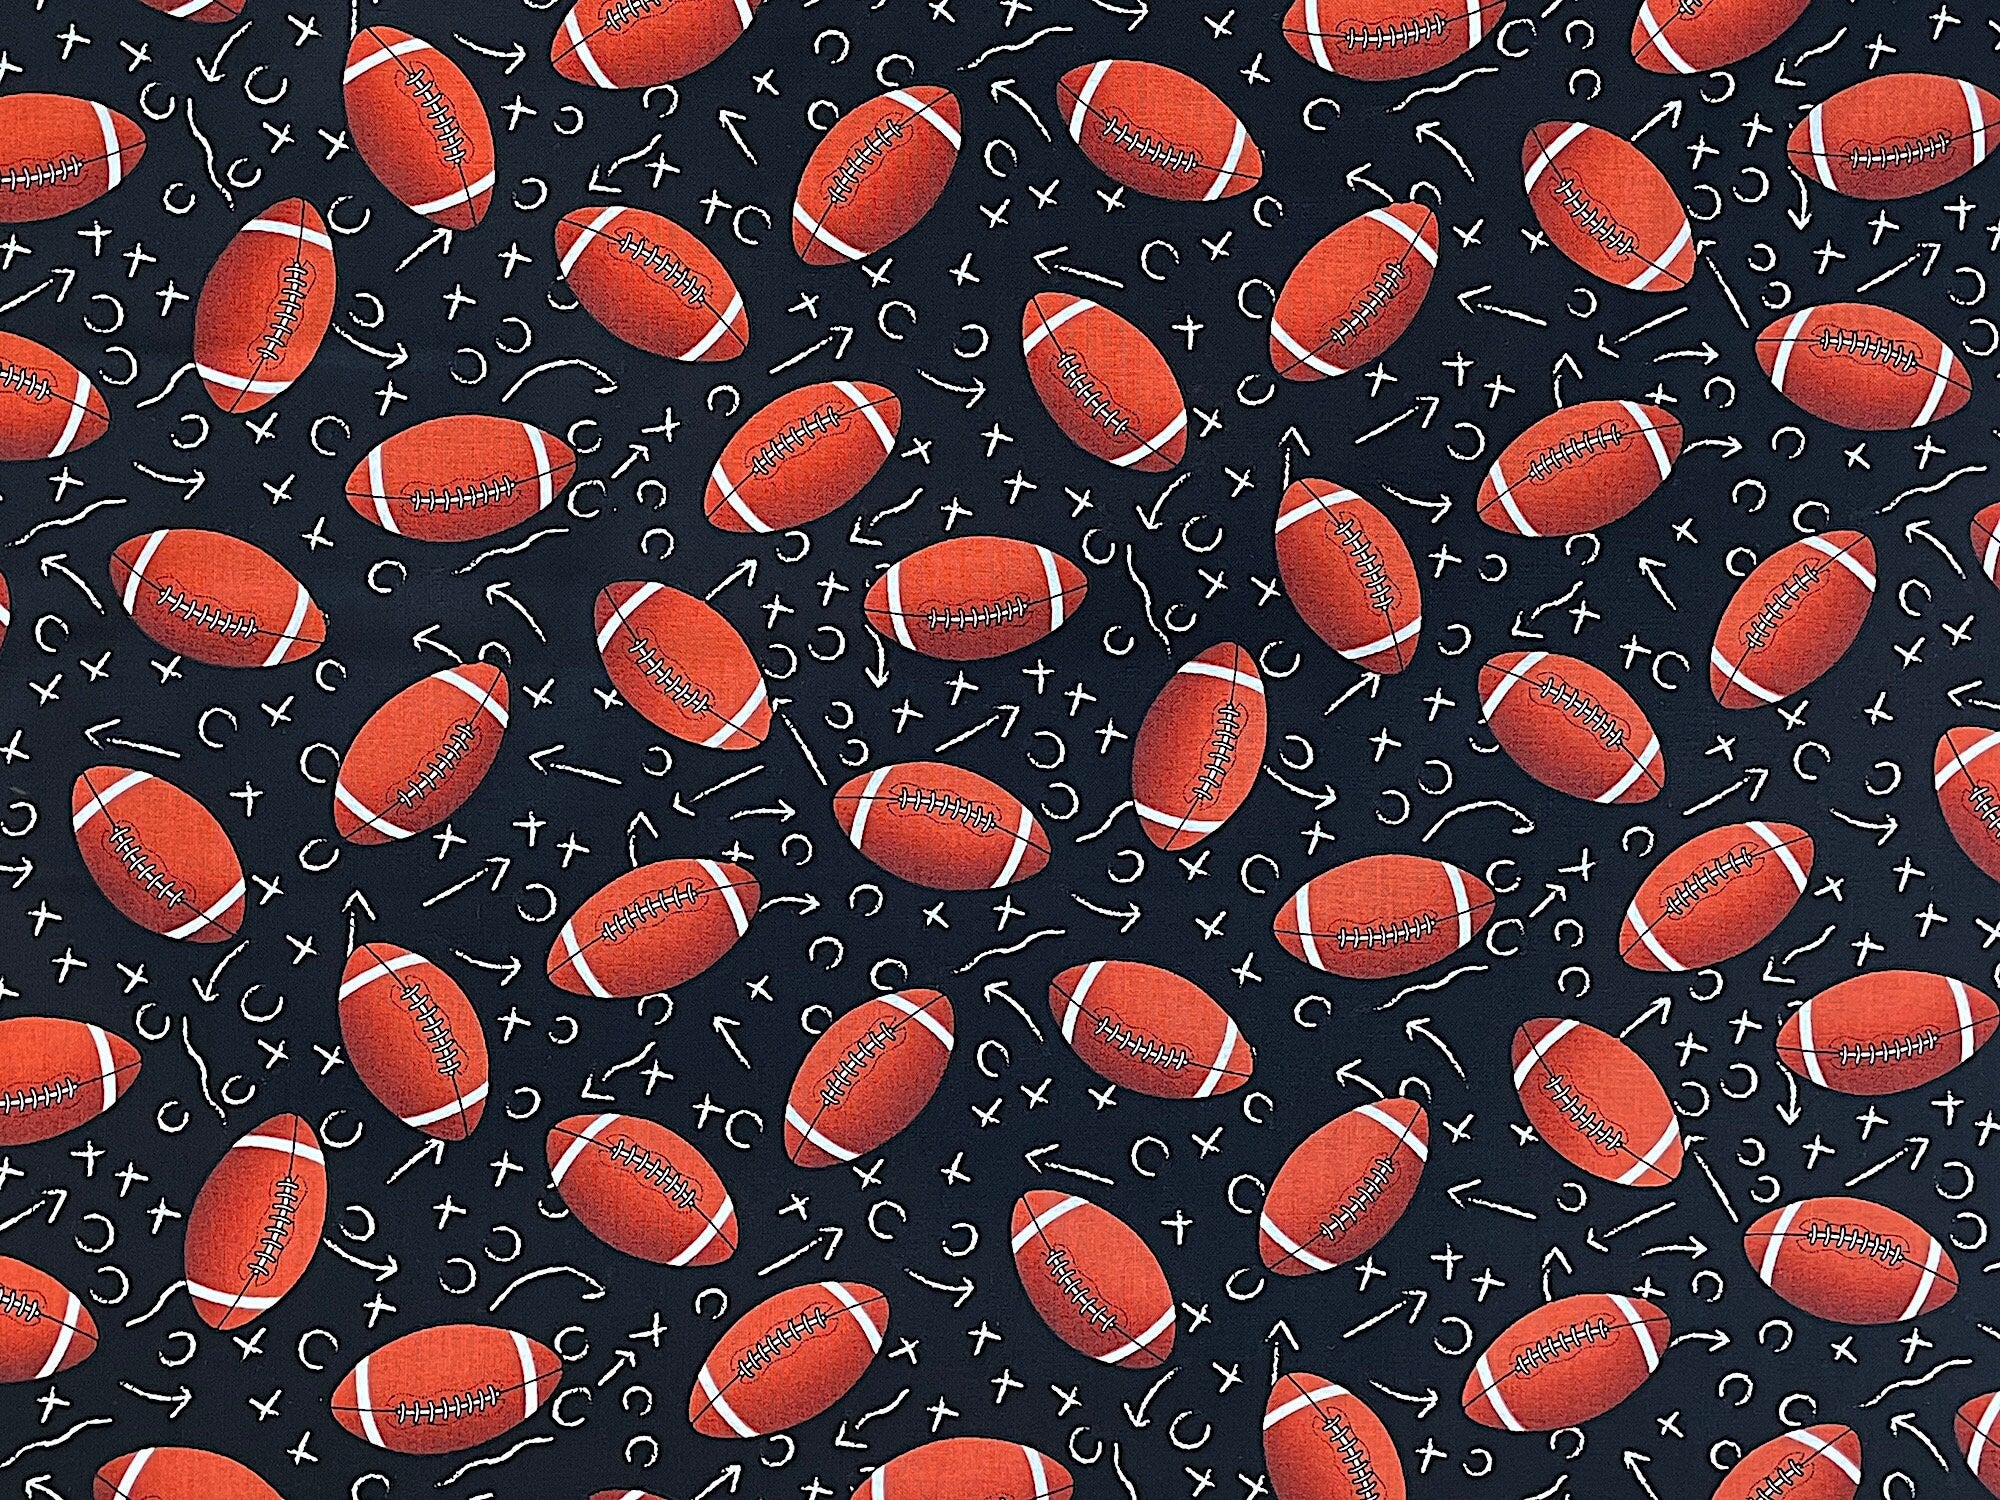 Black cotton fabric covered with footballs.